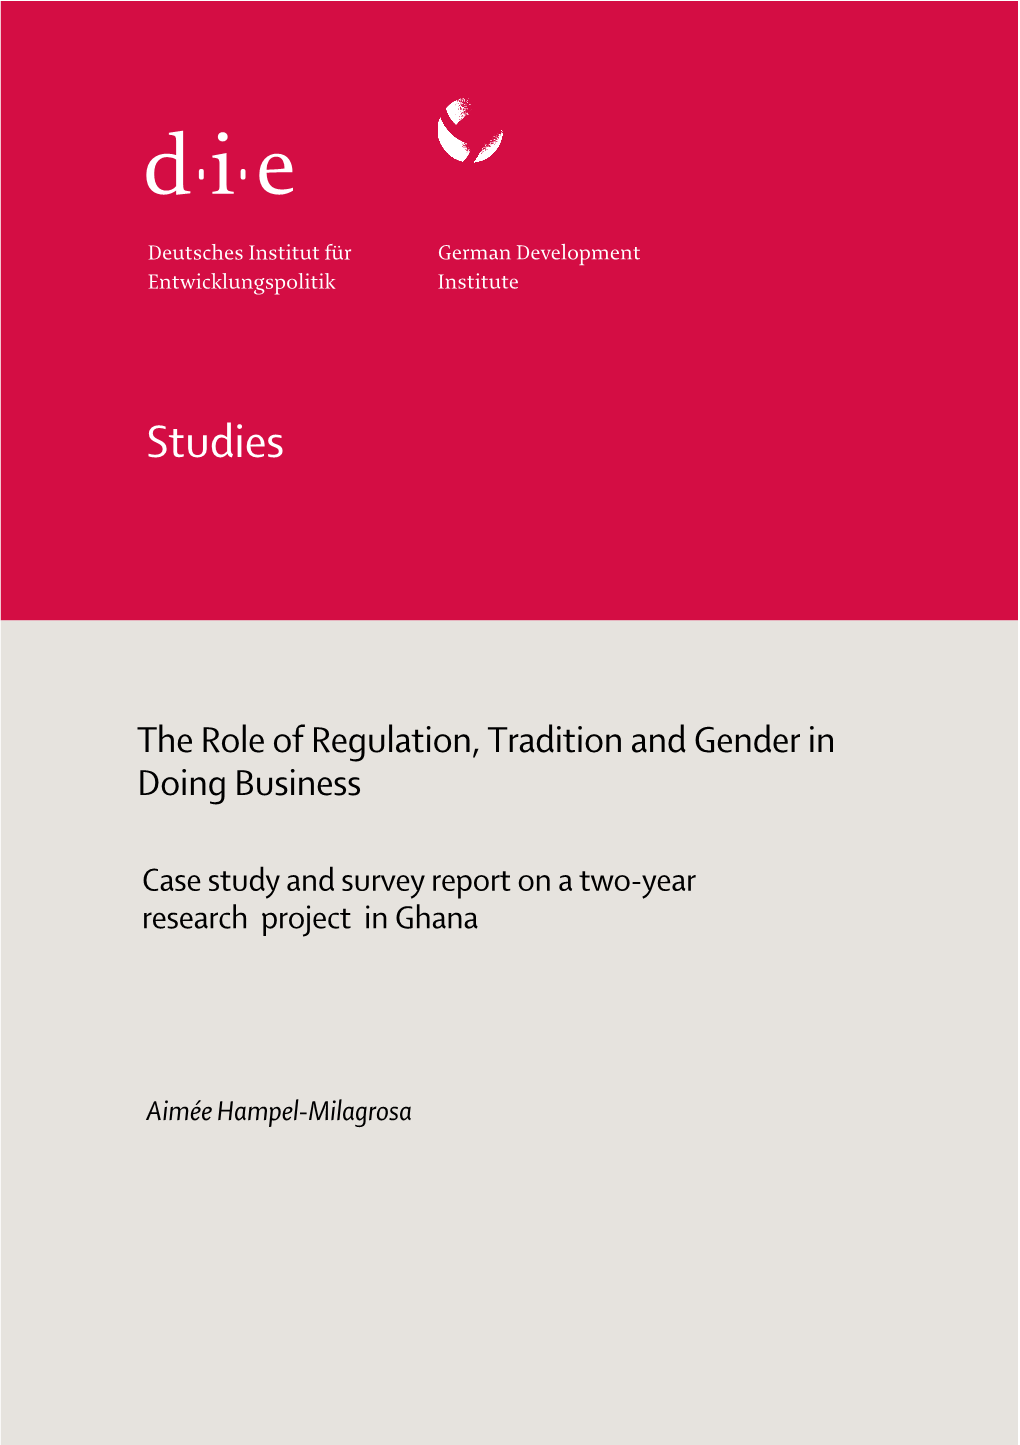 The Role of Regulation, Tradition and Gender in Doing Business